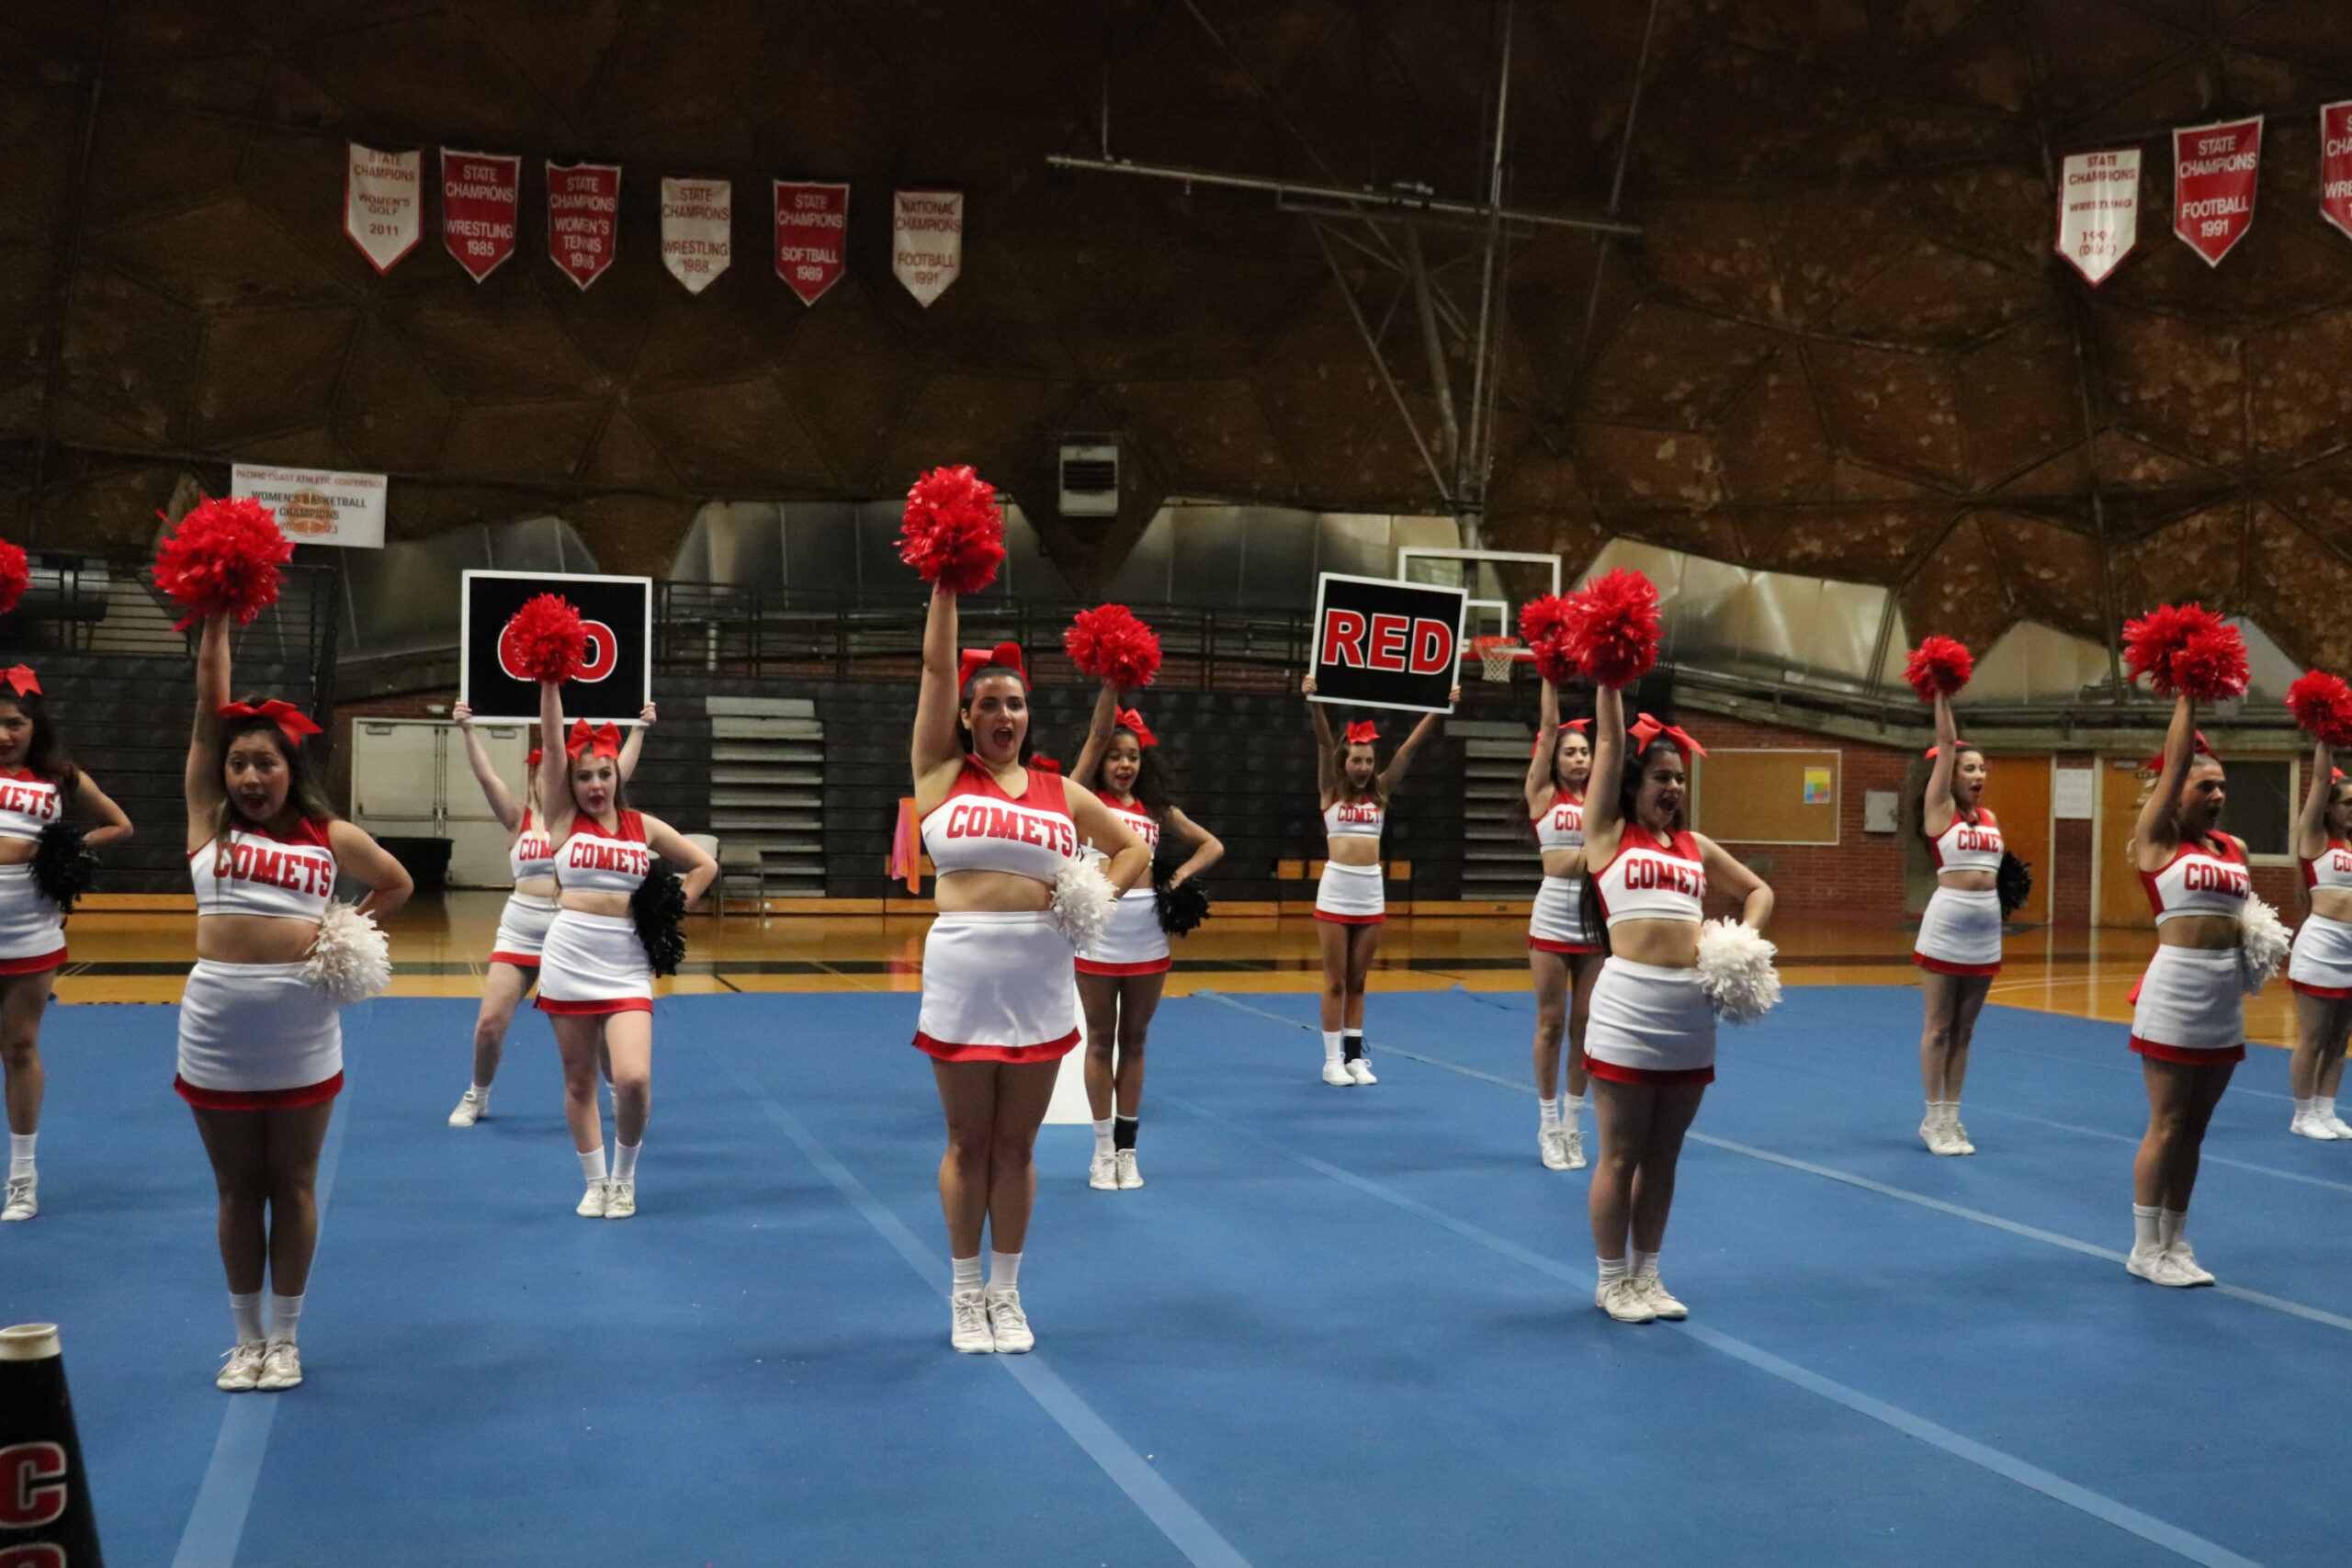 A line of cheerleaders wearing white and red uniforms pose with their red pom poms in the air.